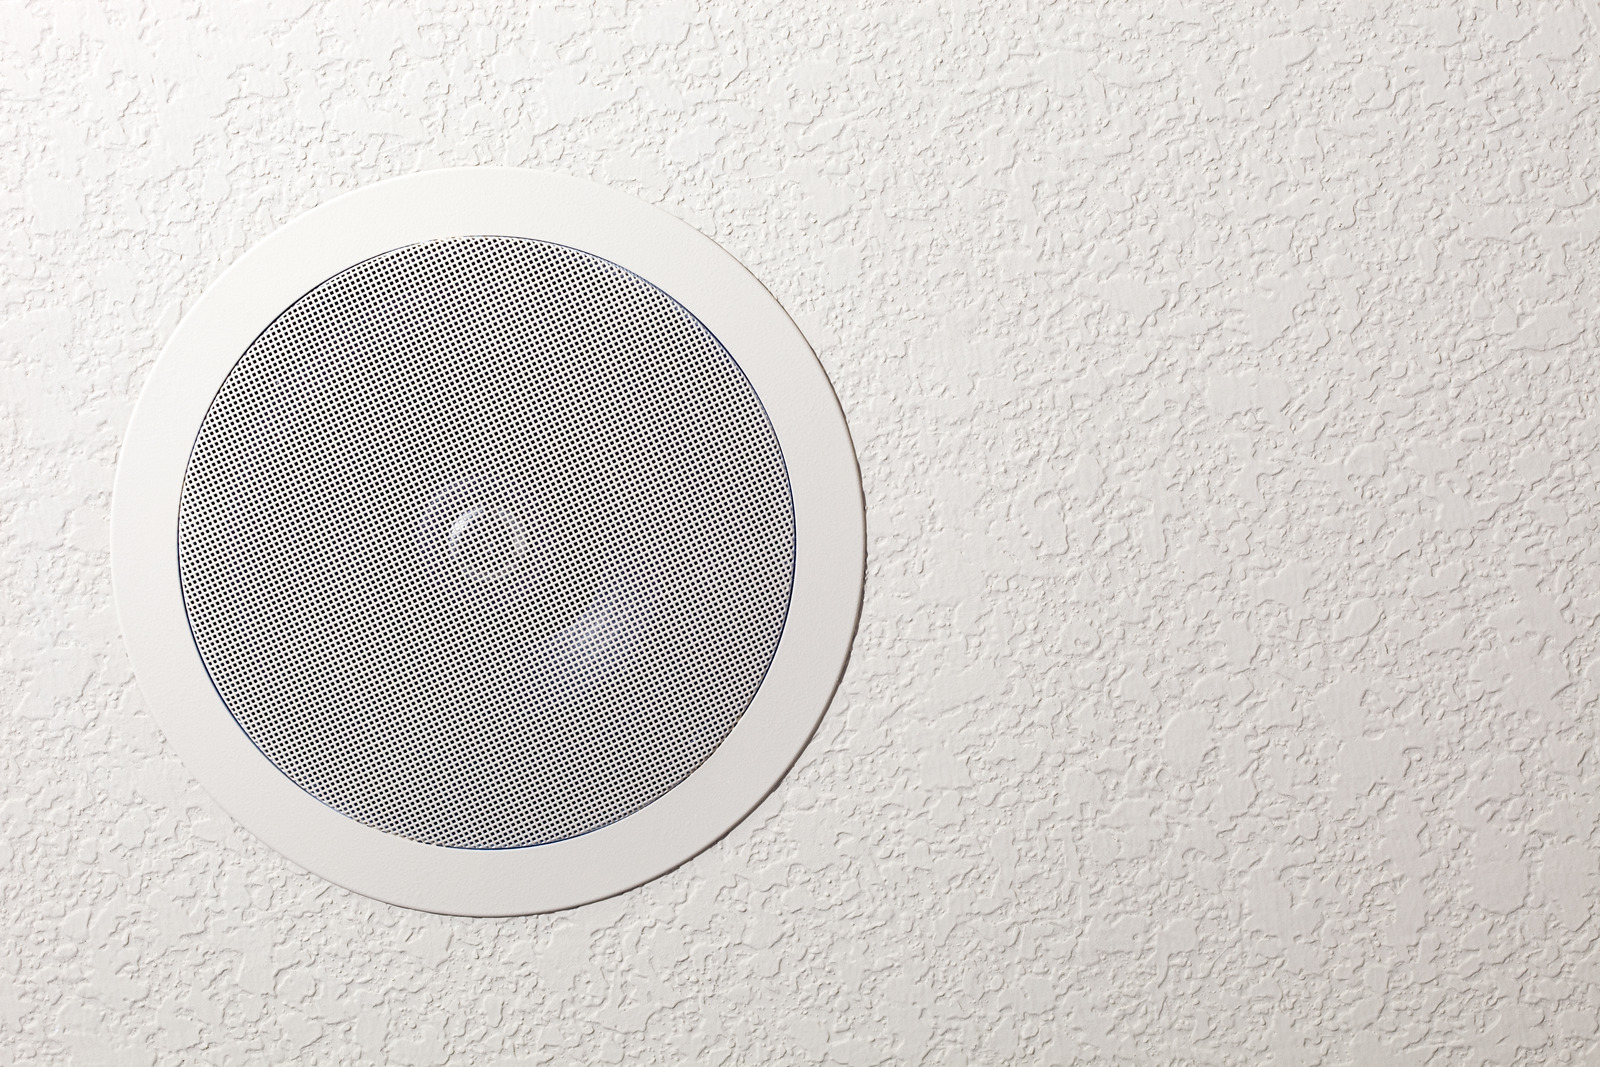 "A new in-ceiling residential surround sound speaker. Multiple speakers are mounted throughout the house, providing background audio entertainment."